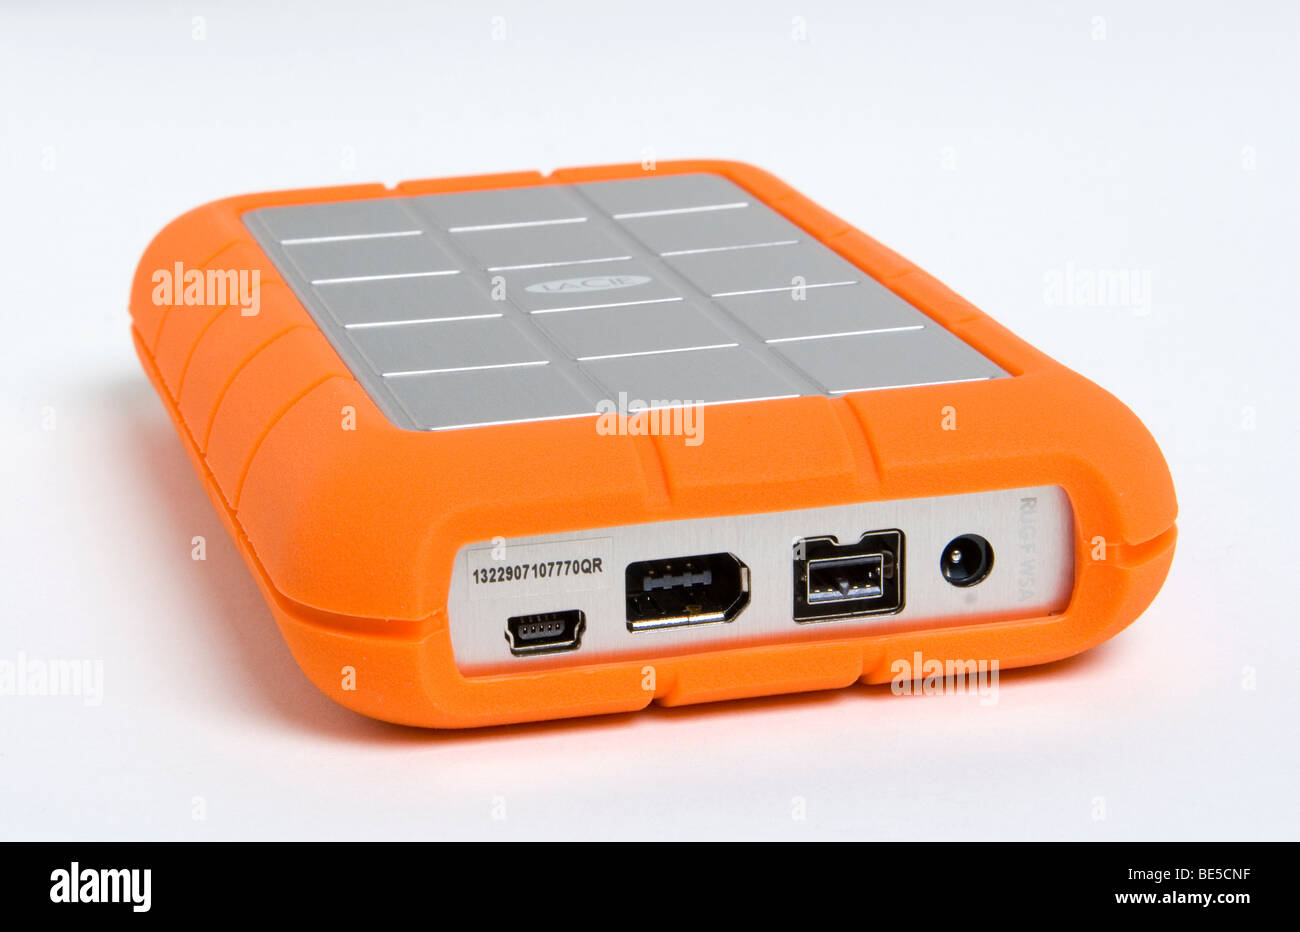 Lacie Rugged 1TB external hard drive showing FireWire 400, FireWire 800 and USB 2.0 ports Stock Photo